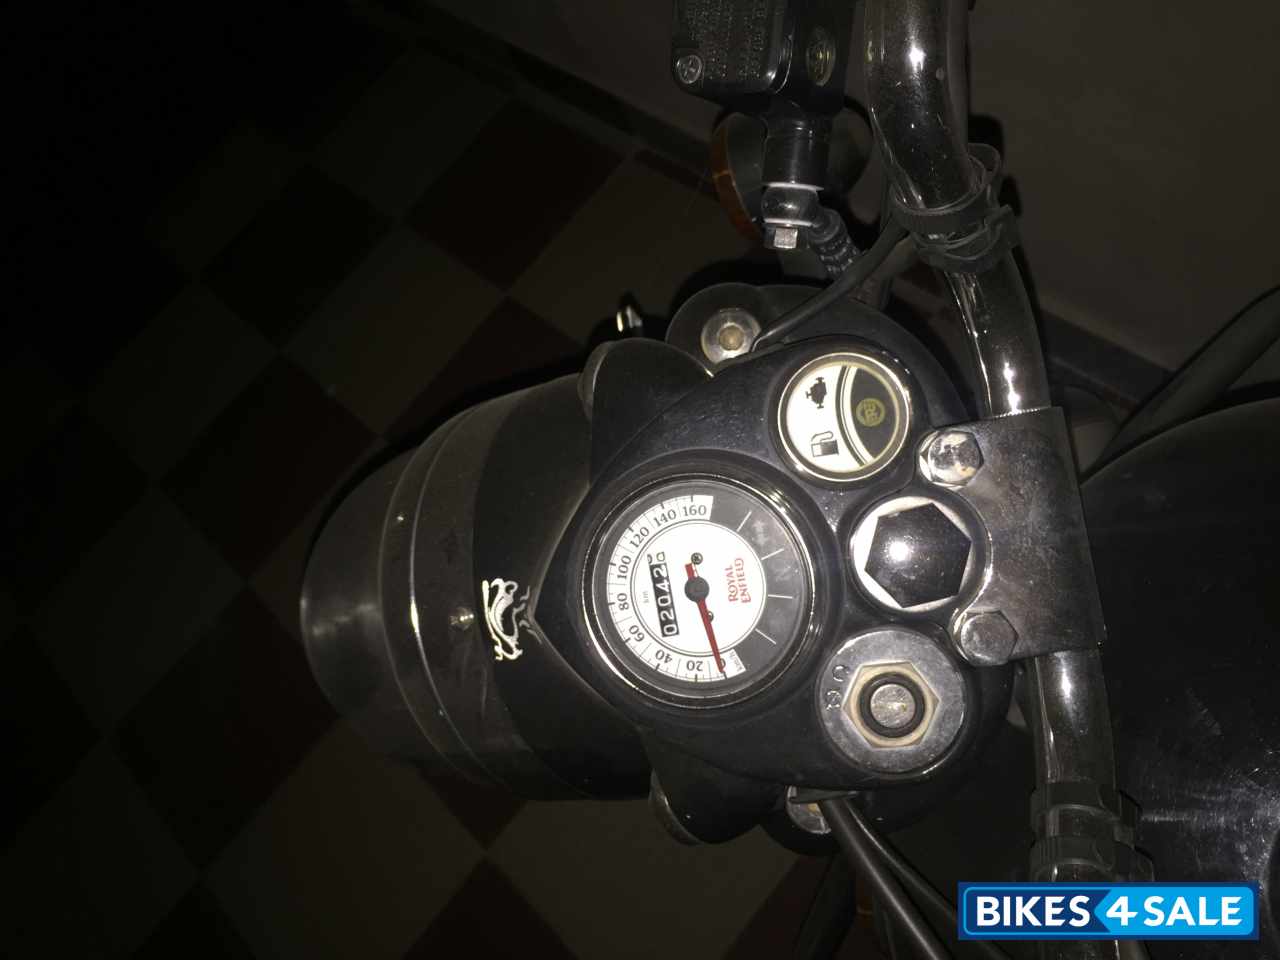 Black Royal Enfield Classic 500 for sale in Bangalore. New condition ...